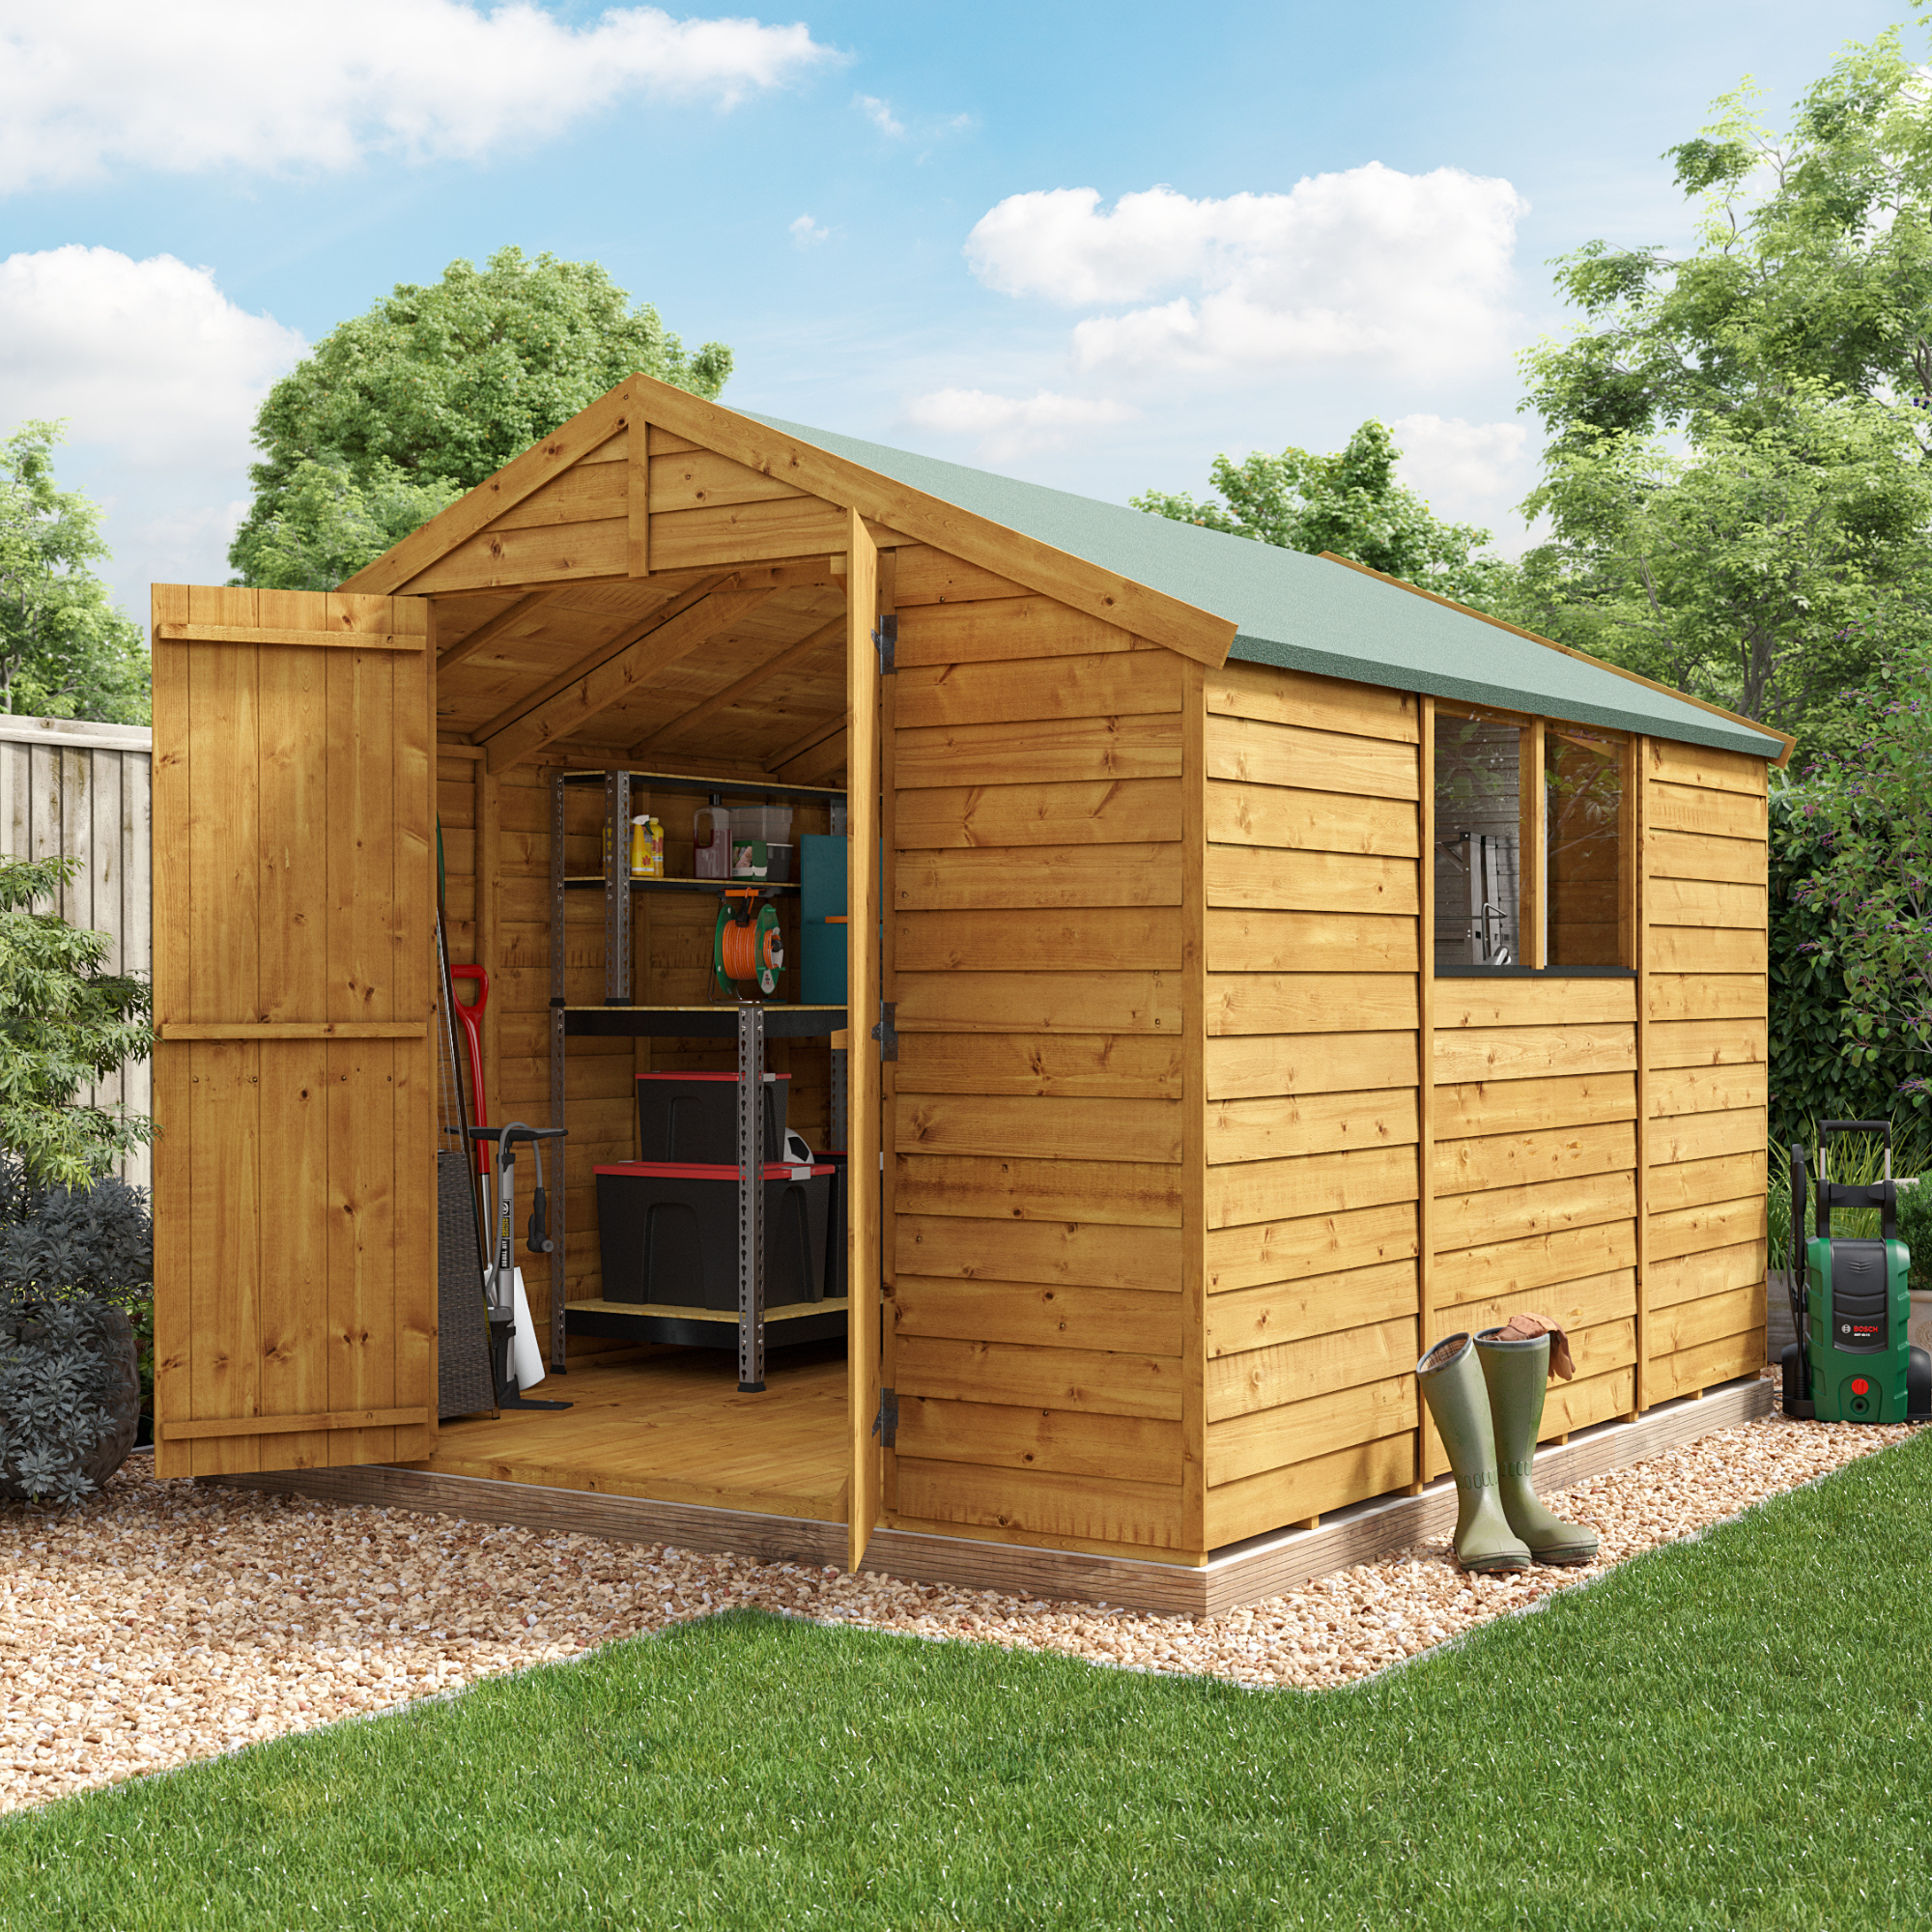 10 x 8 Shed - BillyOh Keeper Overlap Apex Wooden Shed - Windowed 10x8 Garden Shed